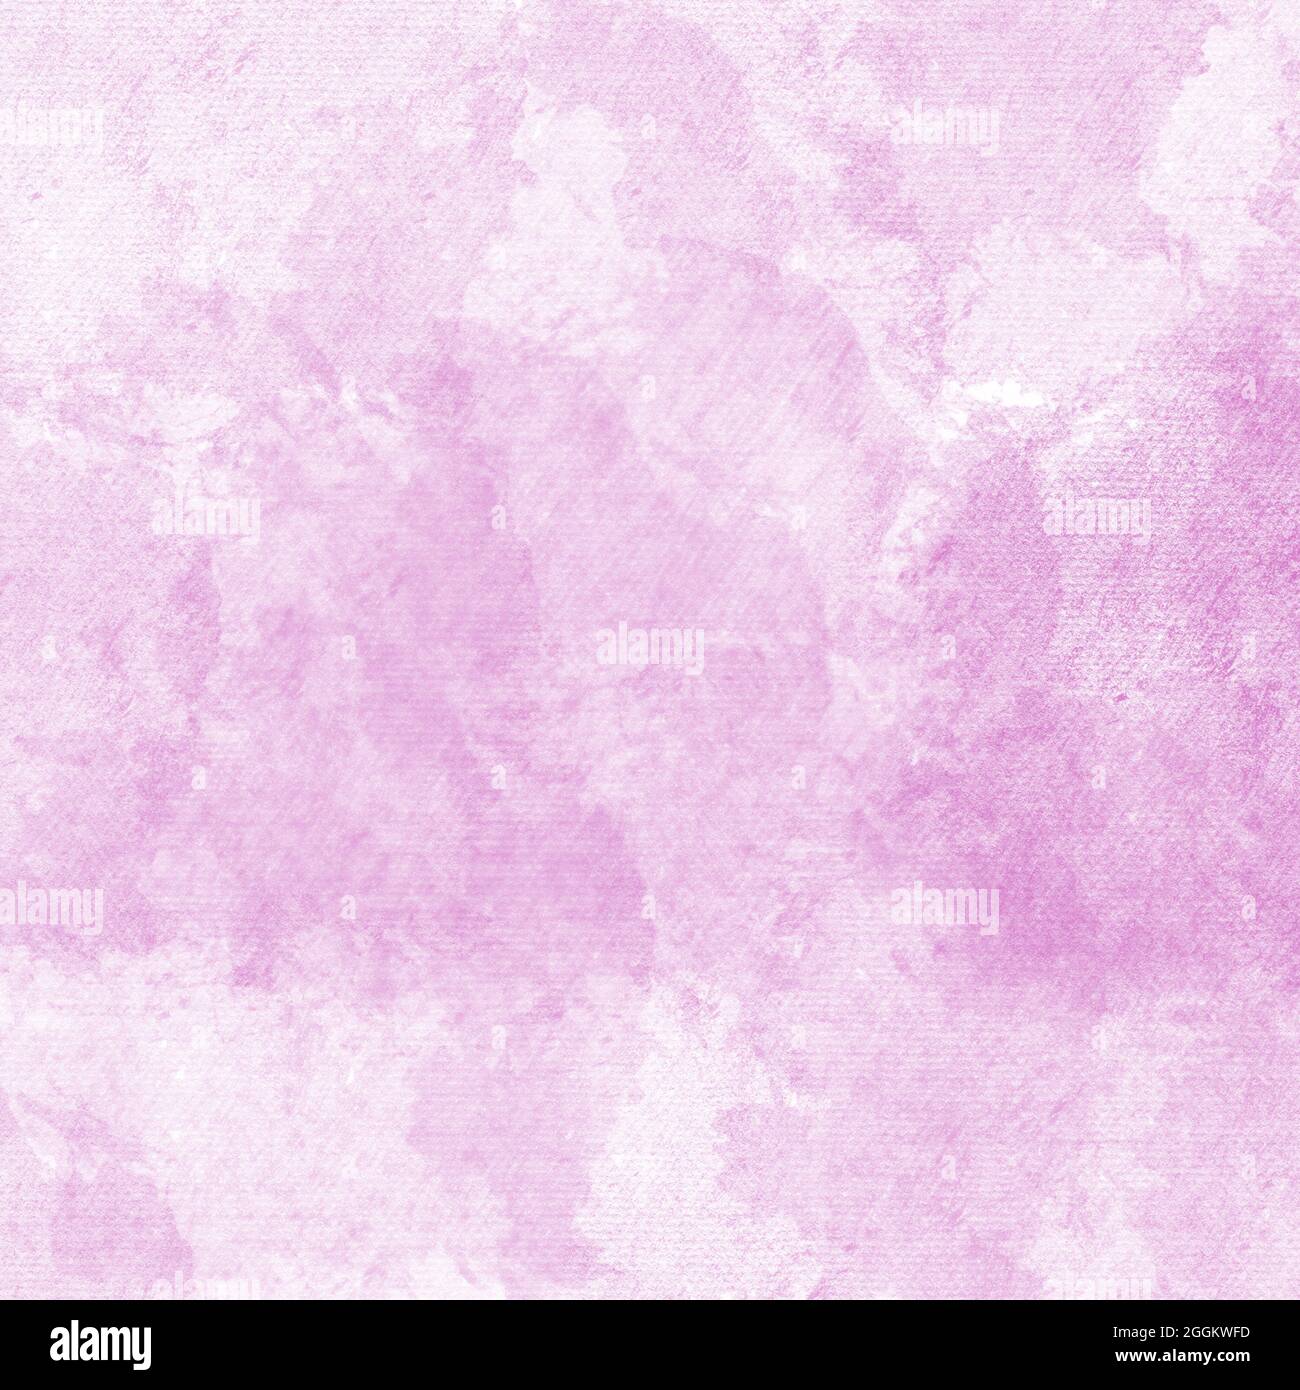 Pastel pink background for your wallpapers Stock Photo - Alamy